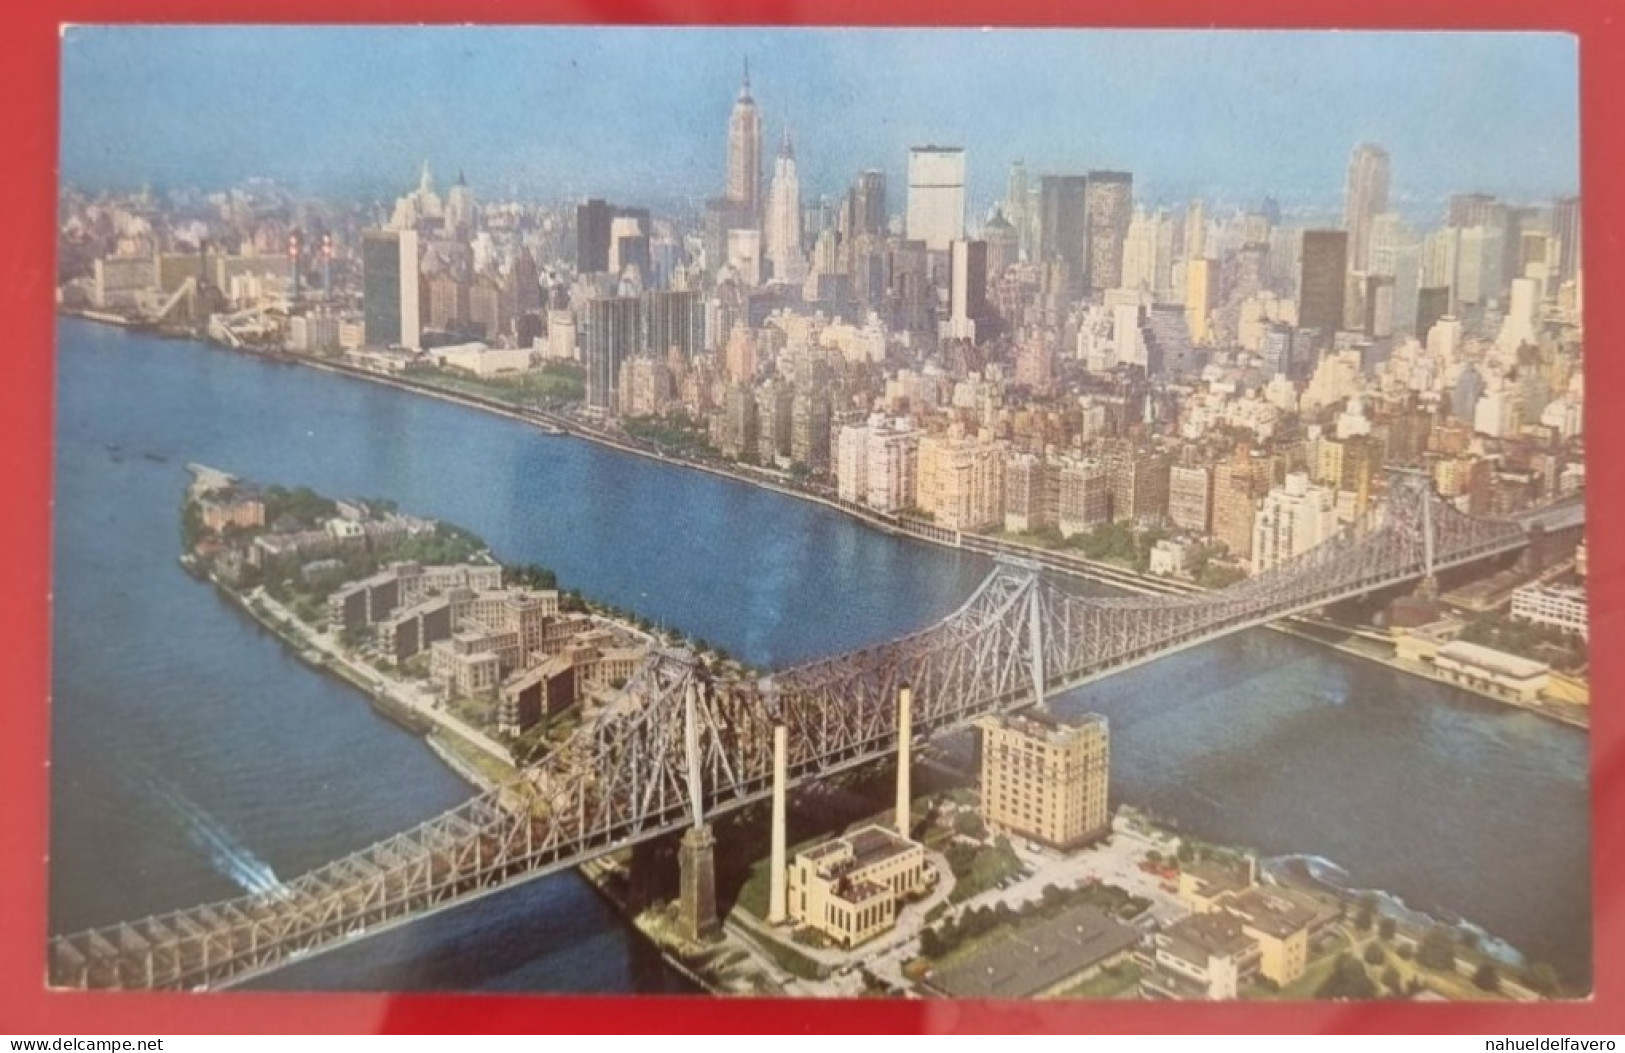 Uncirculated Postcard - USA - NY, NEW YORK CITY - AERIAL VIEW OF 59TH ST. BRIDGE - Ponts & Tunnels